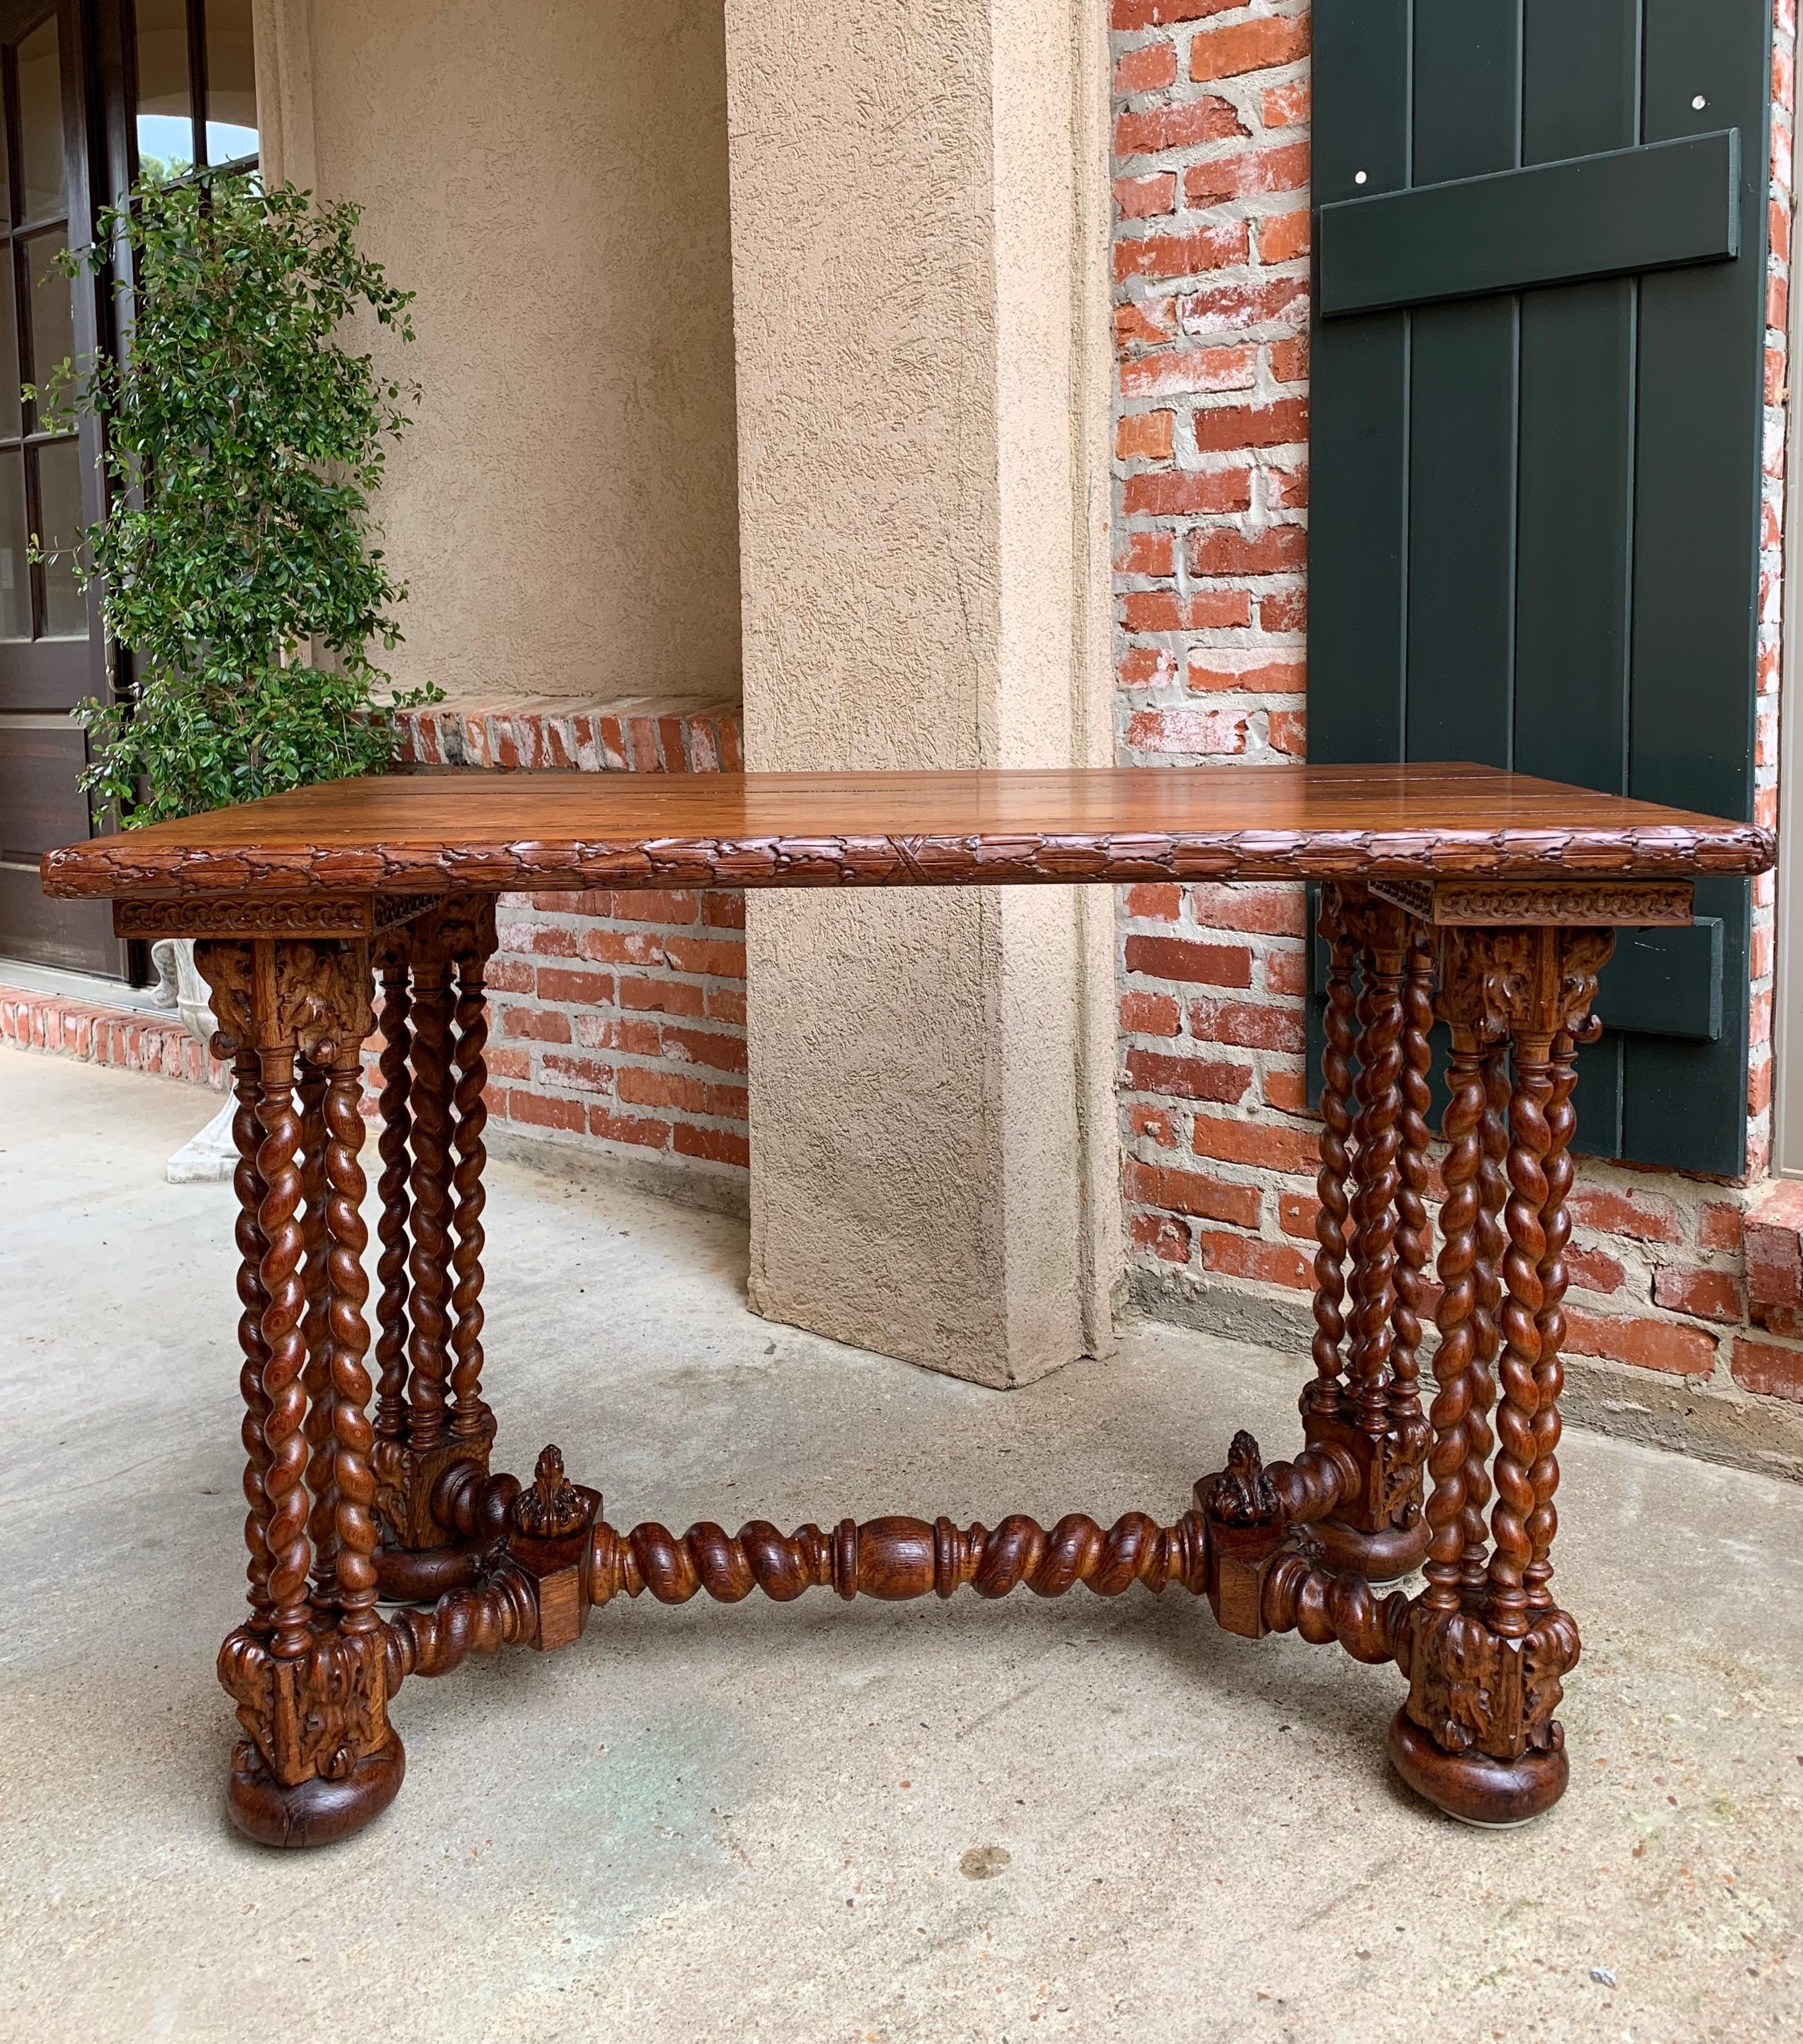 Direct from France, a very unique antique French carved oak table~
~Four large columns, each consisting of four separate barley twist posts set upon large square bases. Bases have carved trim upon all four sides and rest upon large bun feet~

~Large